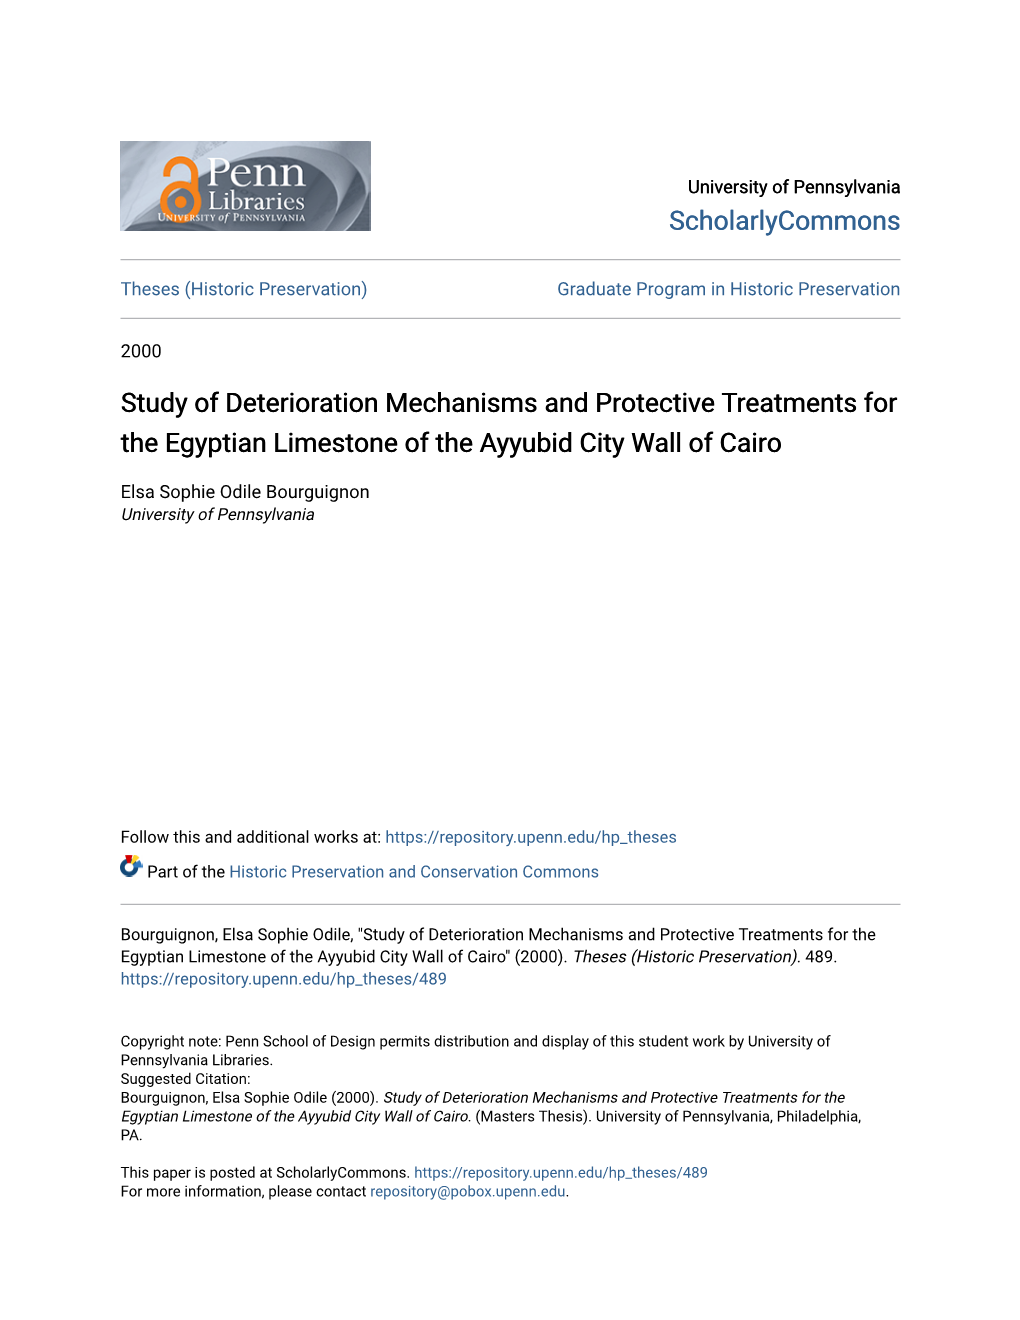 Study of Deterioration Mechanisms and Protective Treatments for the Egyptian Limestone of the Ayyubid City Wall of Cairo